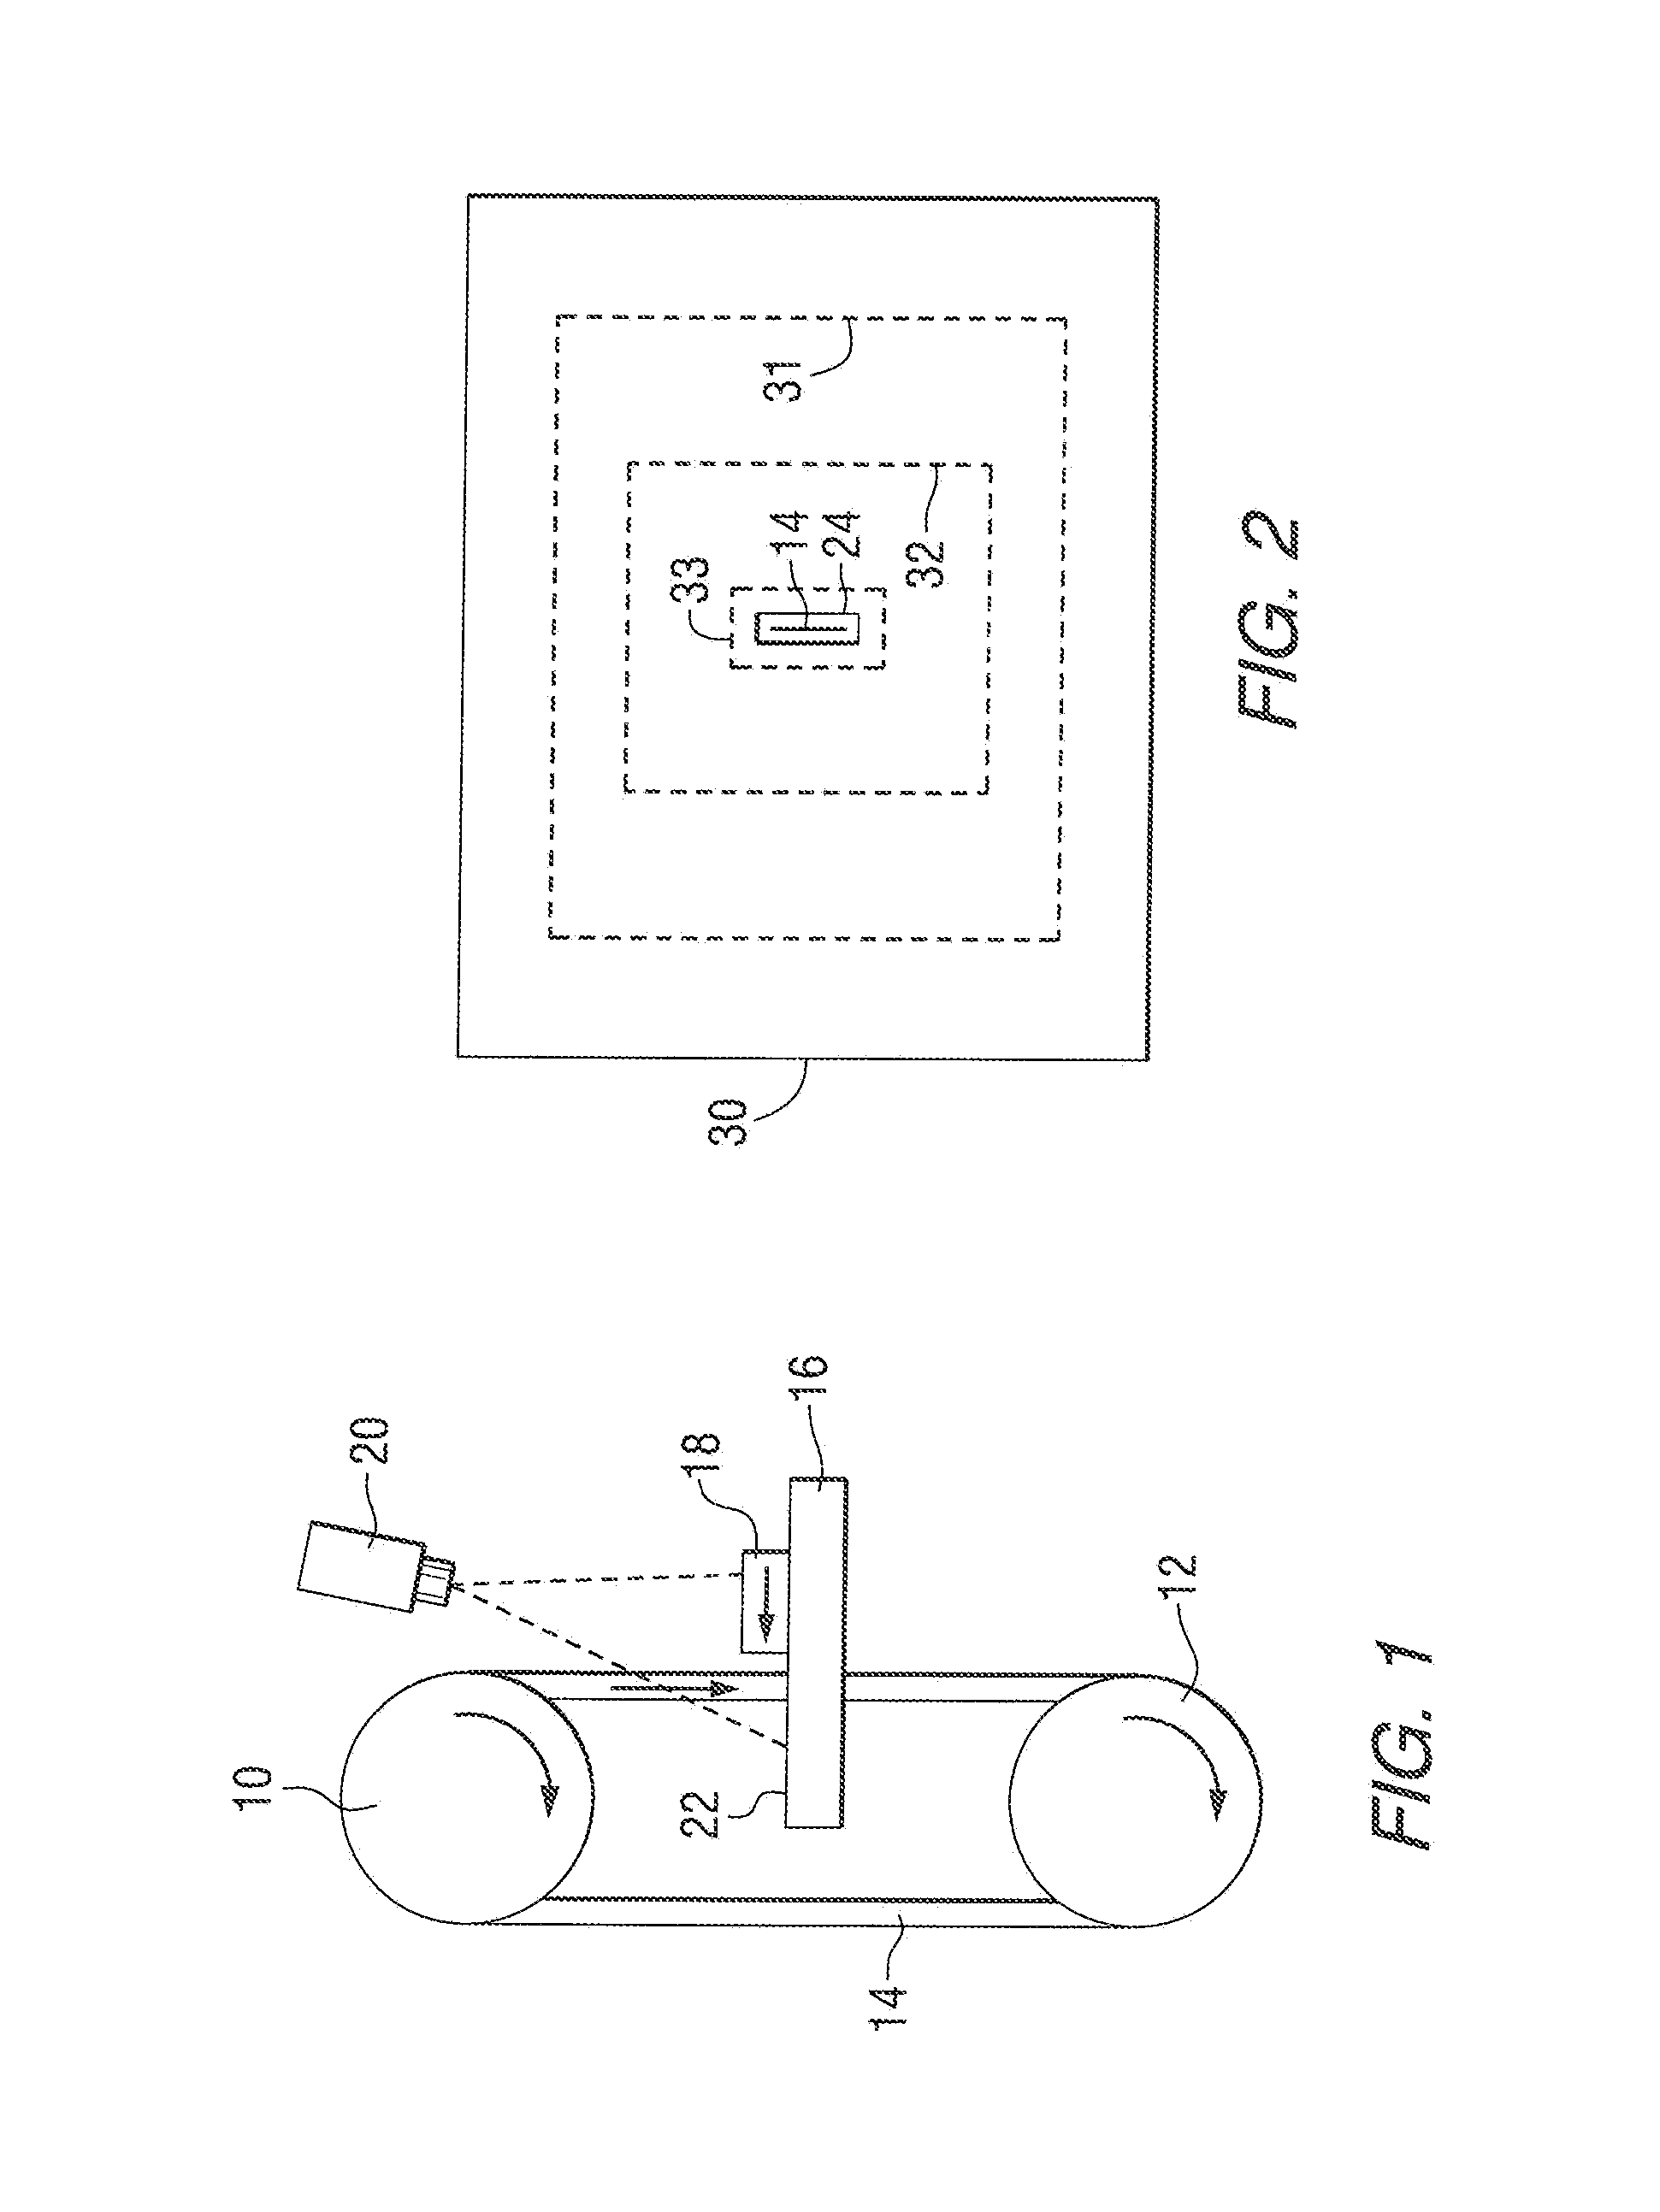 Method for sensing the presence of a human body part within a region of a machine tool